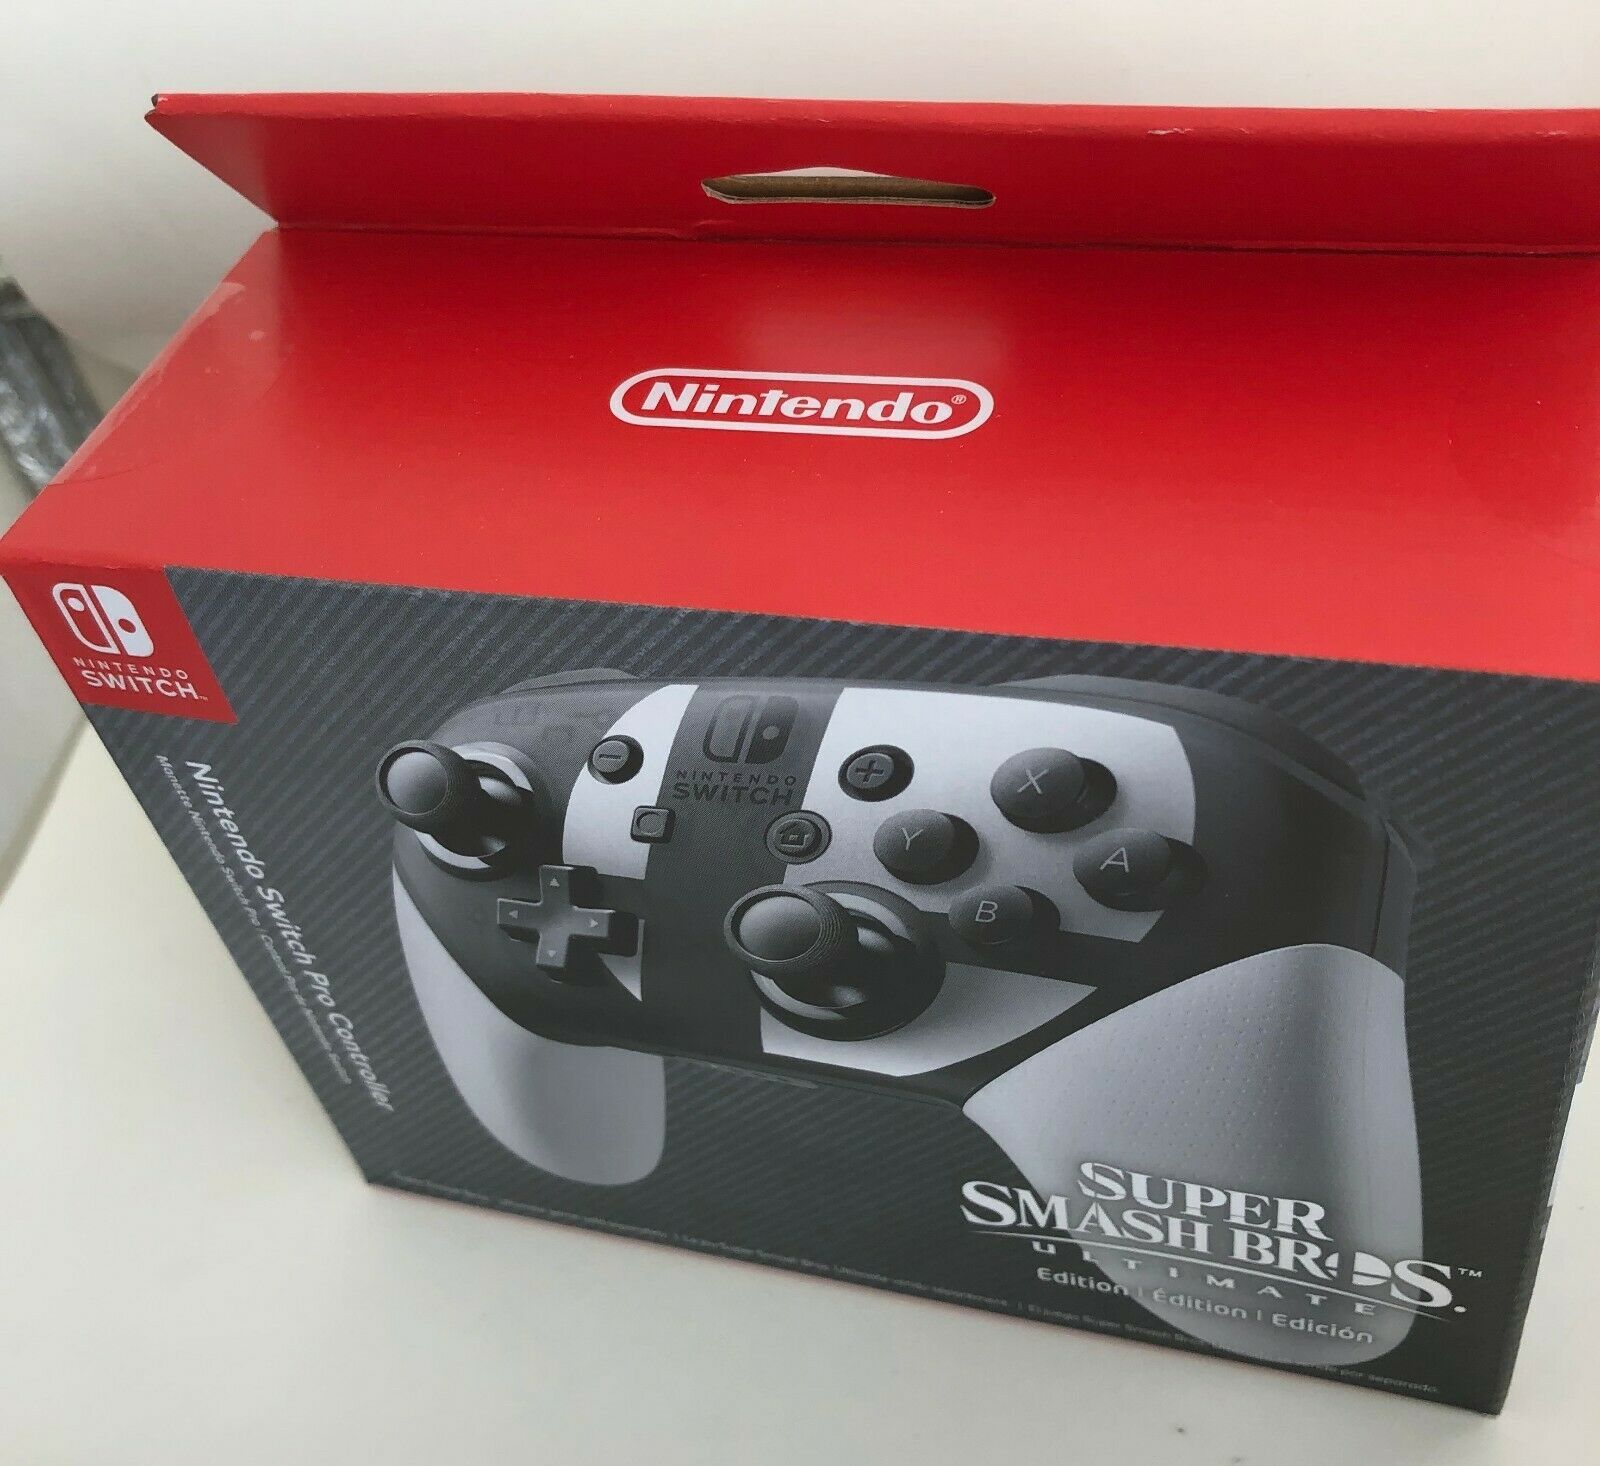 Limited Edition Super Smash Bros Pro Controller for Nintendo Switch